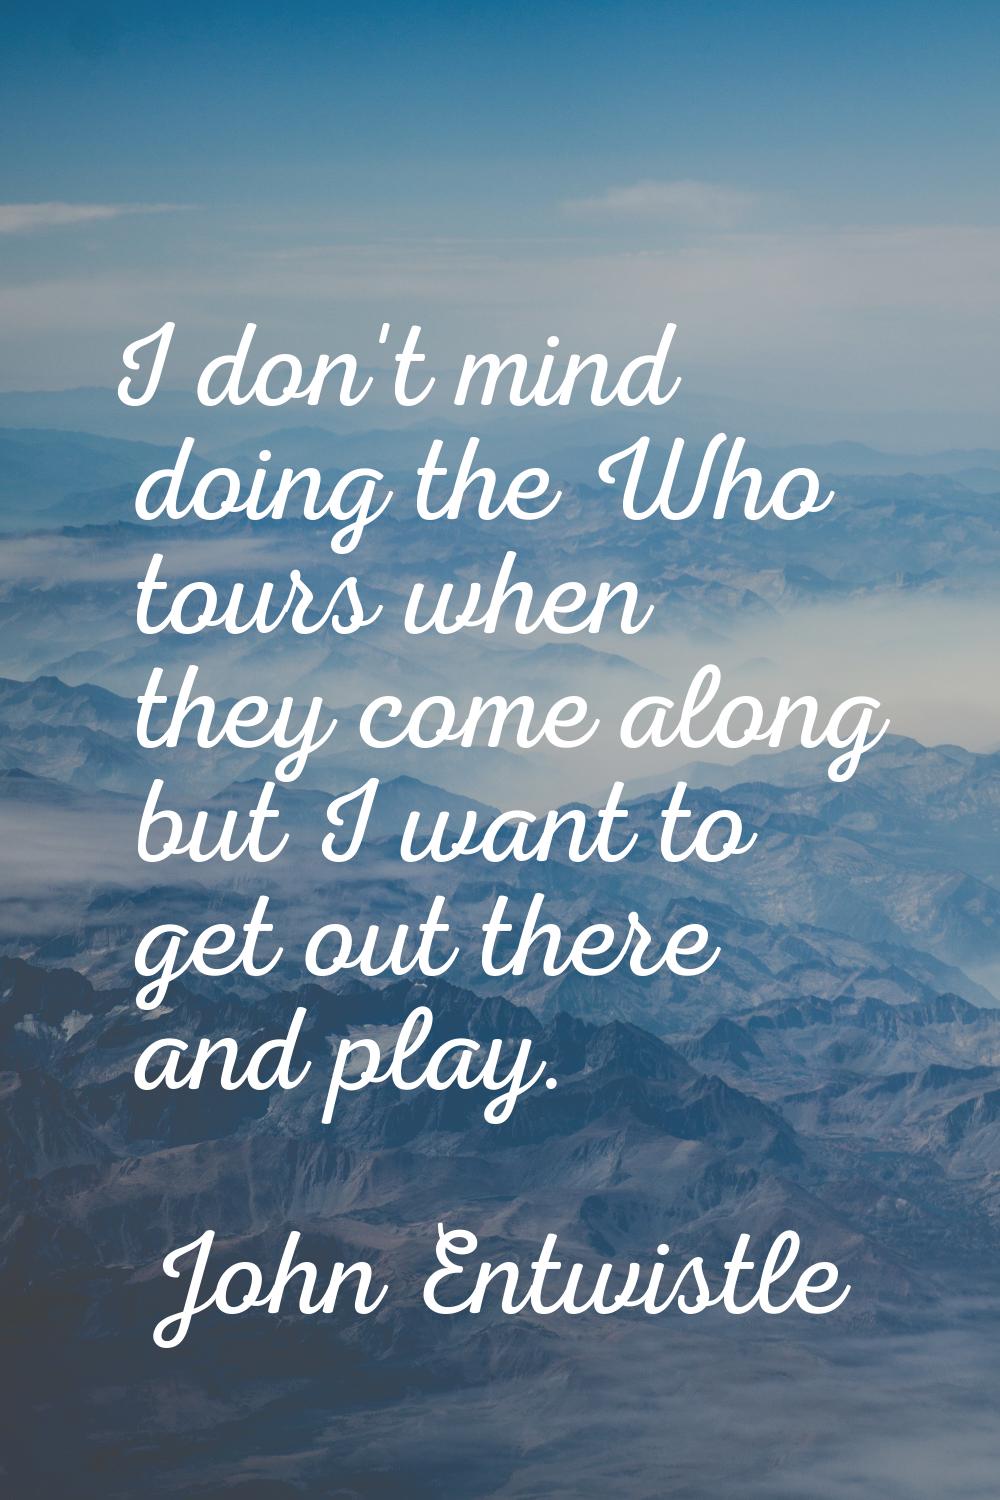 I don't mind doing the Who tours when they come along but I want to get out there and play.